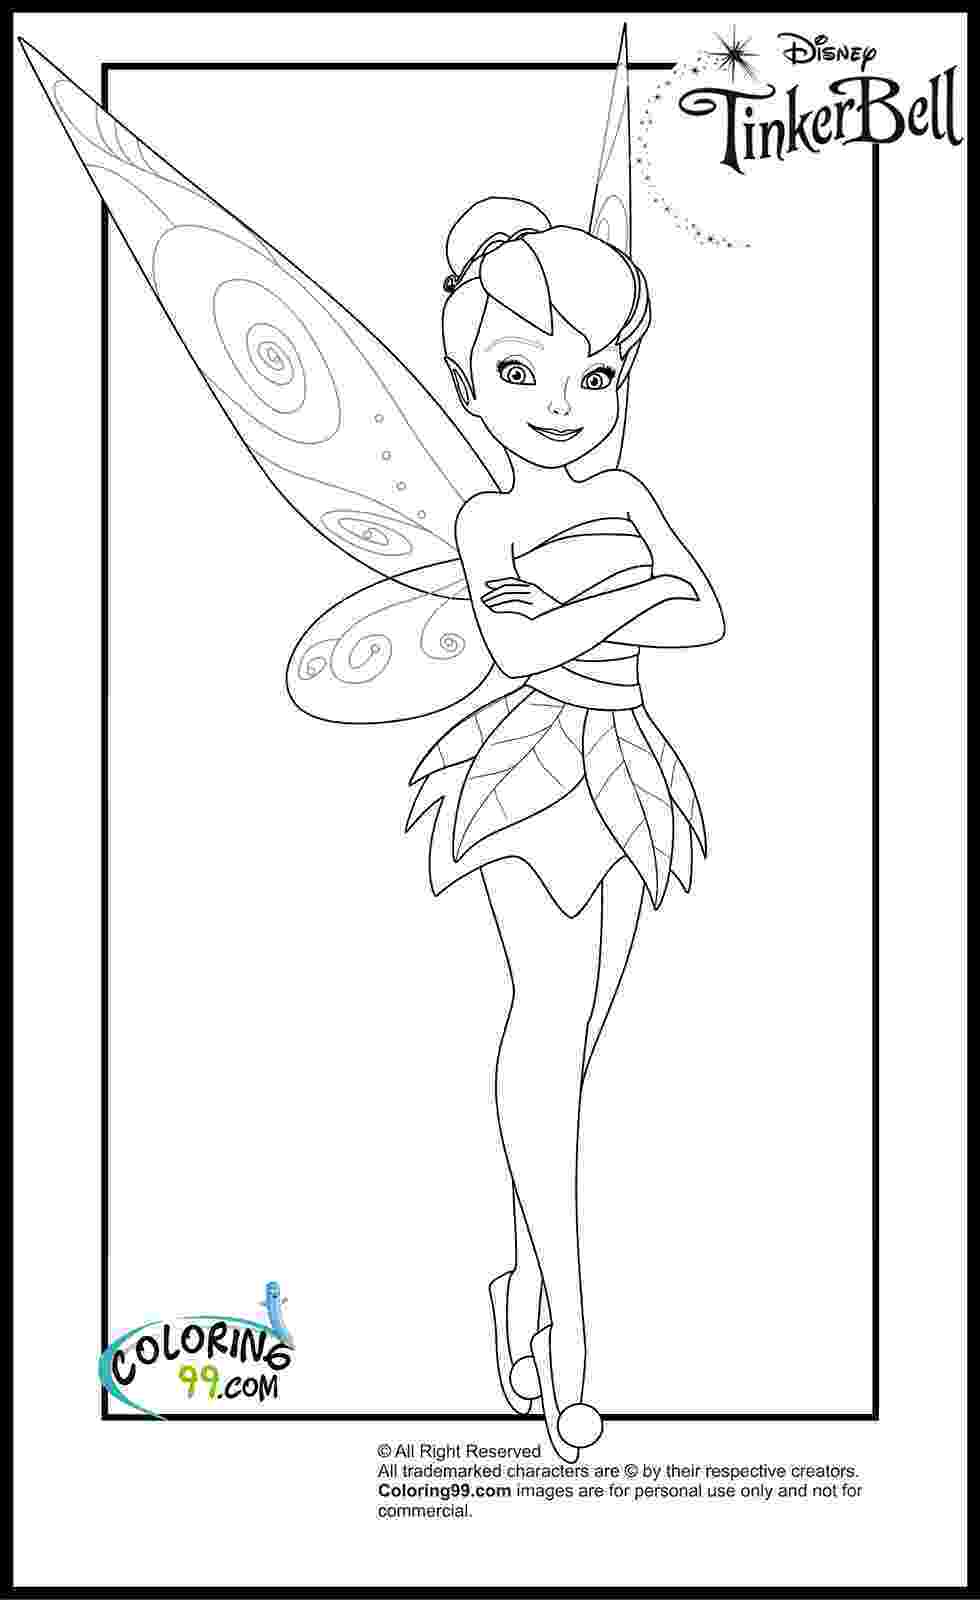 online coloring pages disney for free june 2013 team colors free for disney coloring online pages 